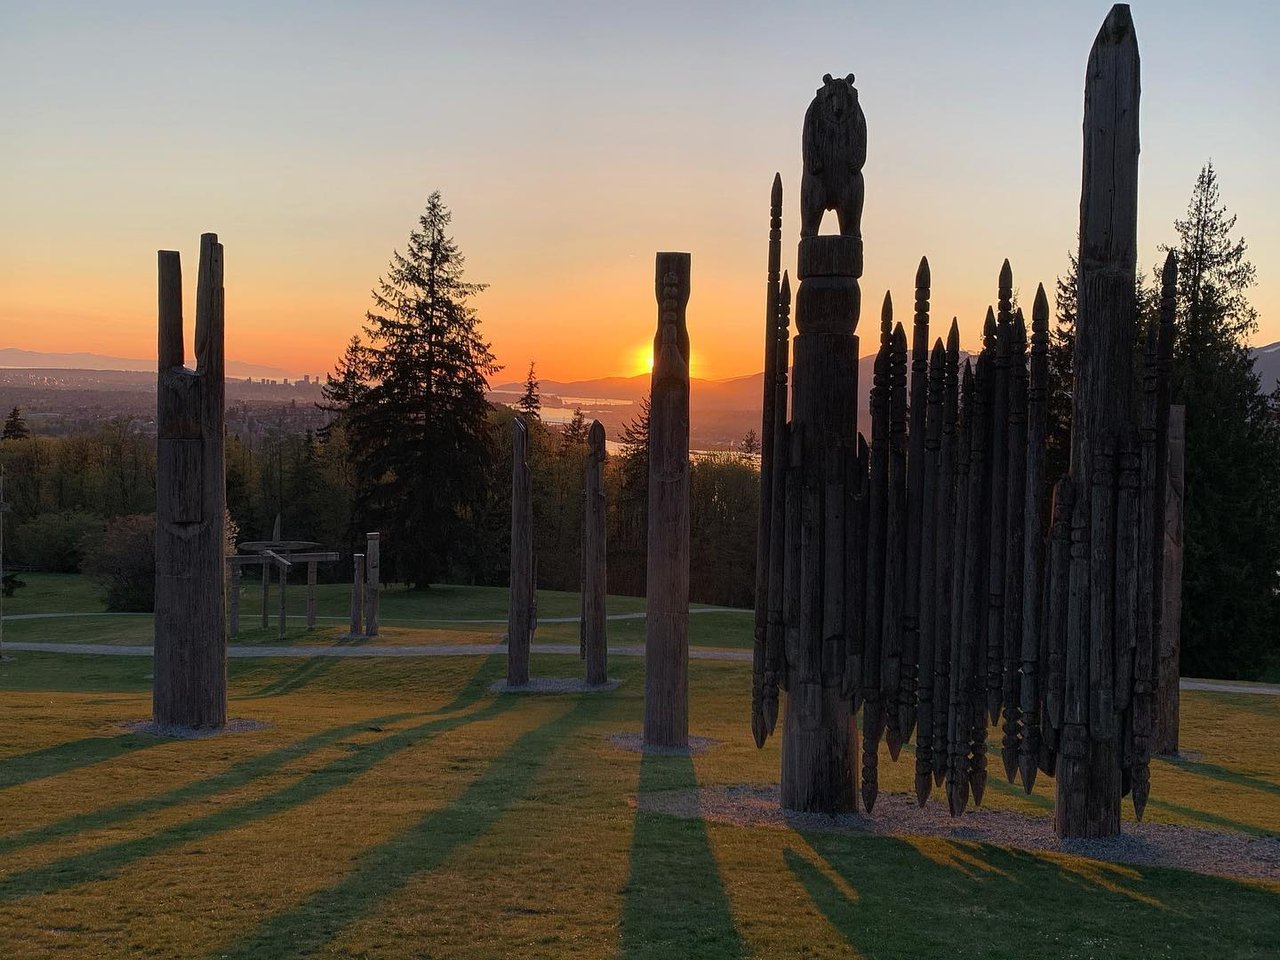 Collection of Totem Poles on the top of Burnaby mountain with the sun setting behind them